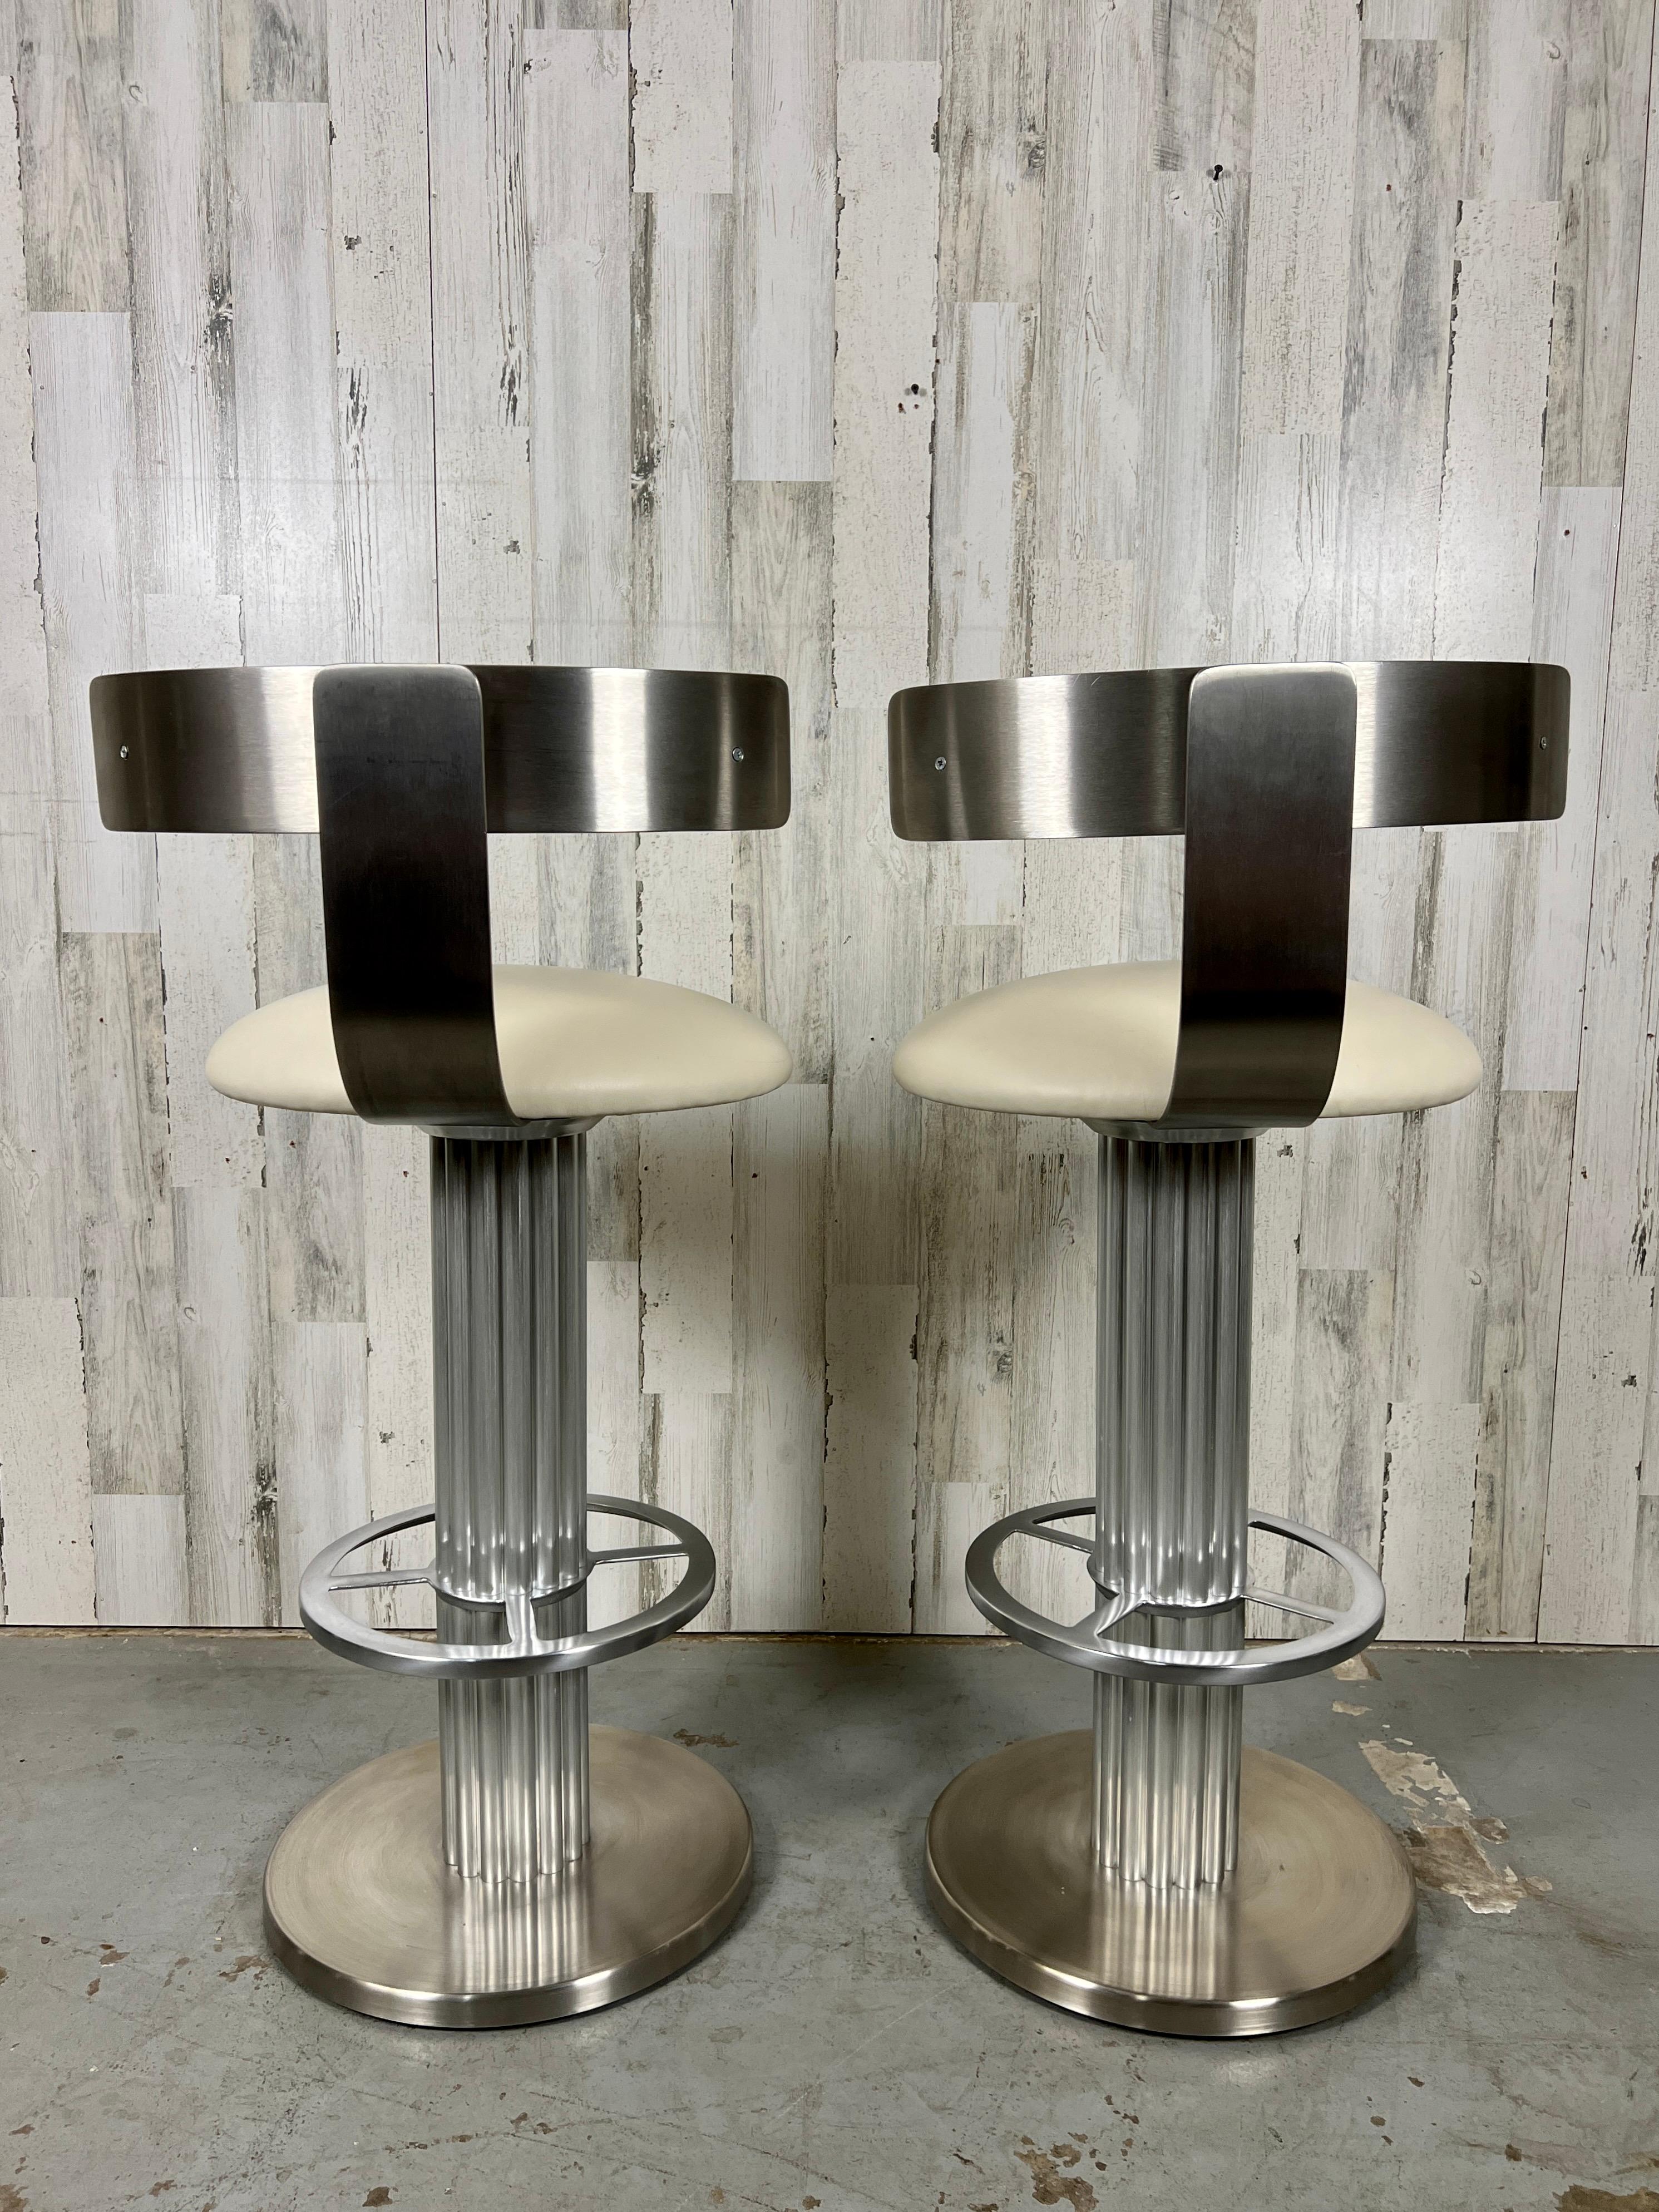 Design For Leisure Brushed Stainless Steel Bar Stools, Set of 6 13